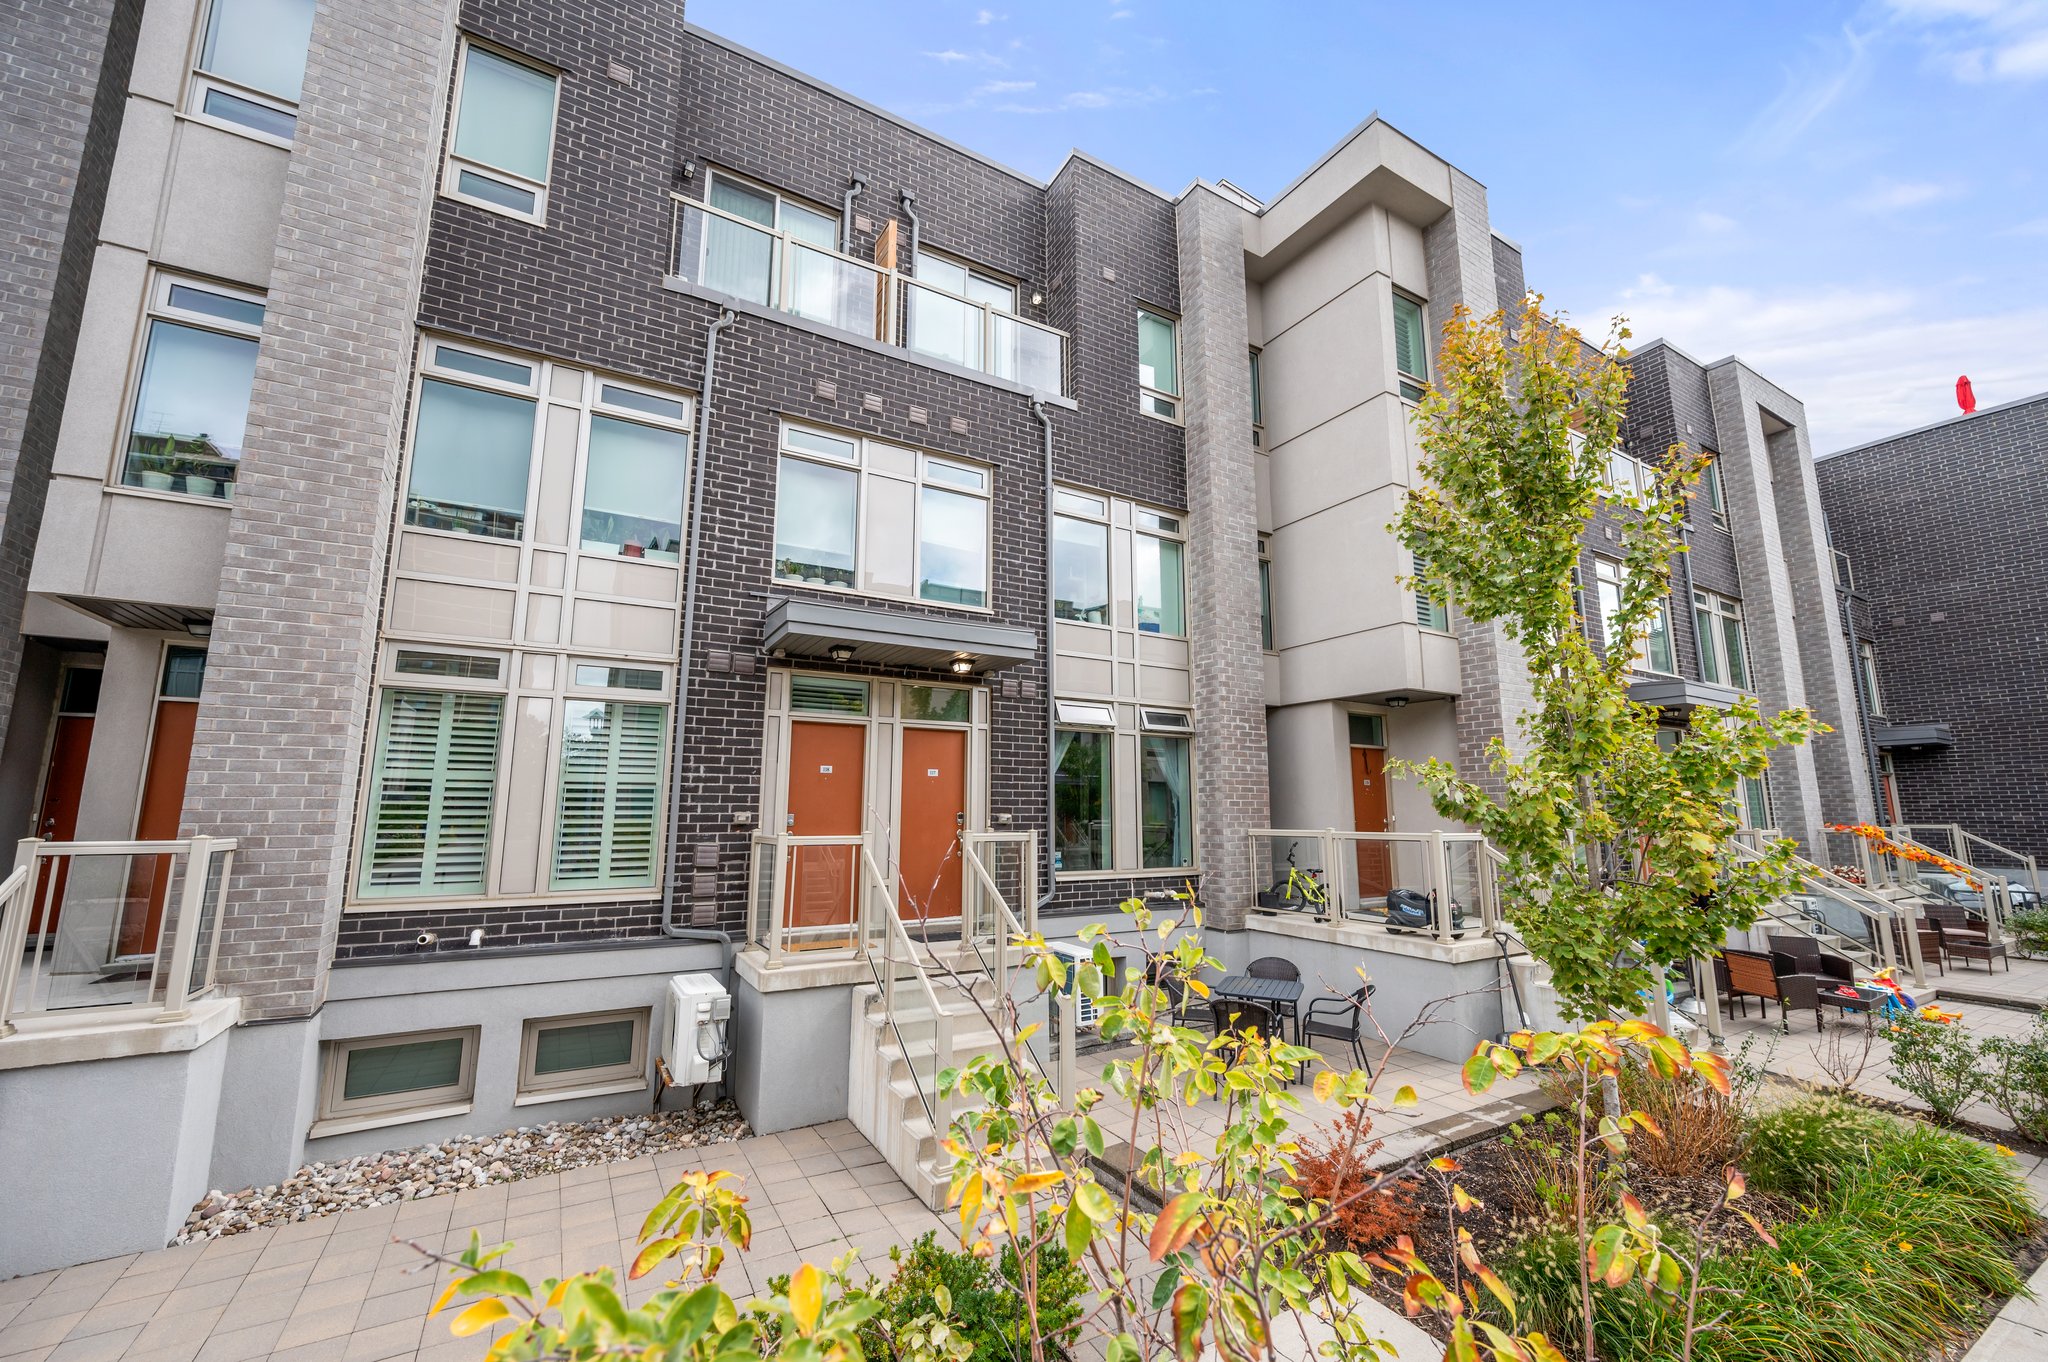 Why is Leslieville such a great place to buy a house or condo?